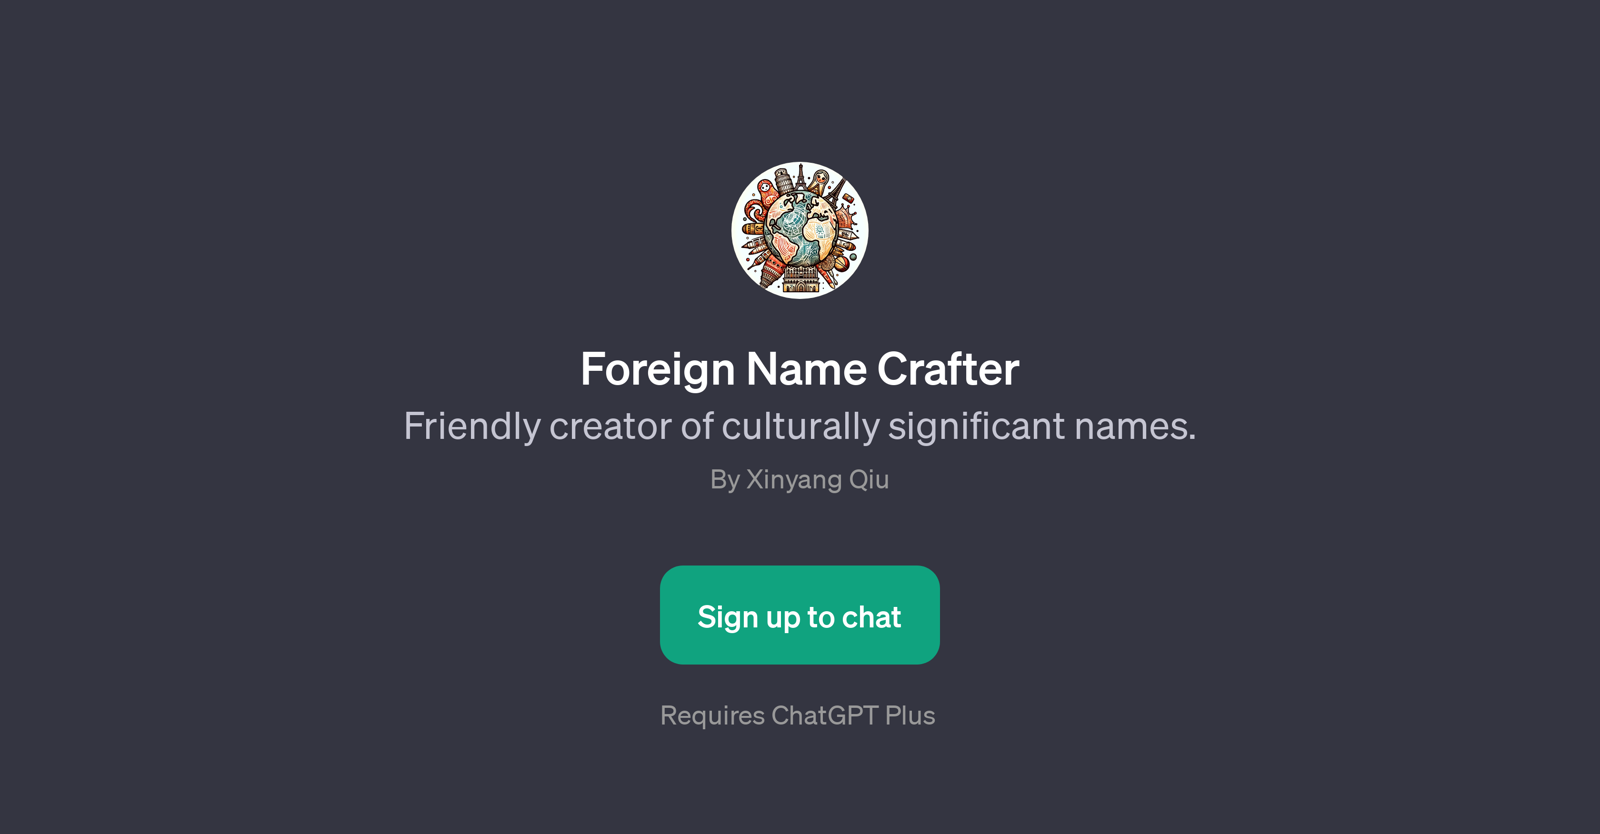 Foreign Name Crafter website